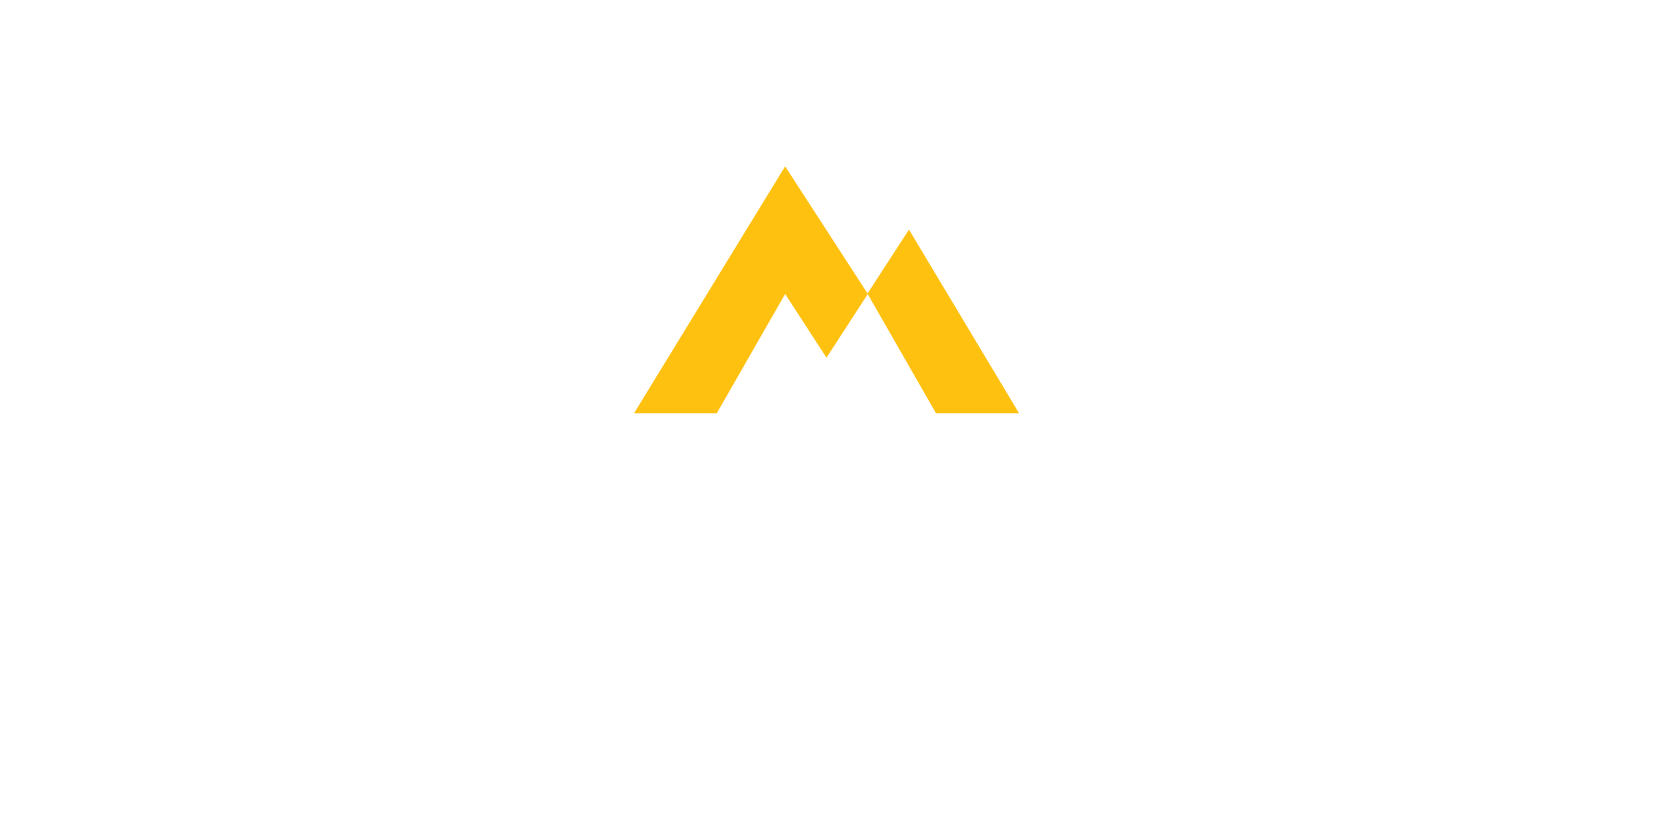 Triangle Mountain Logo - Community Snow Observations Giveaway Contest | CommunitySnowObs